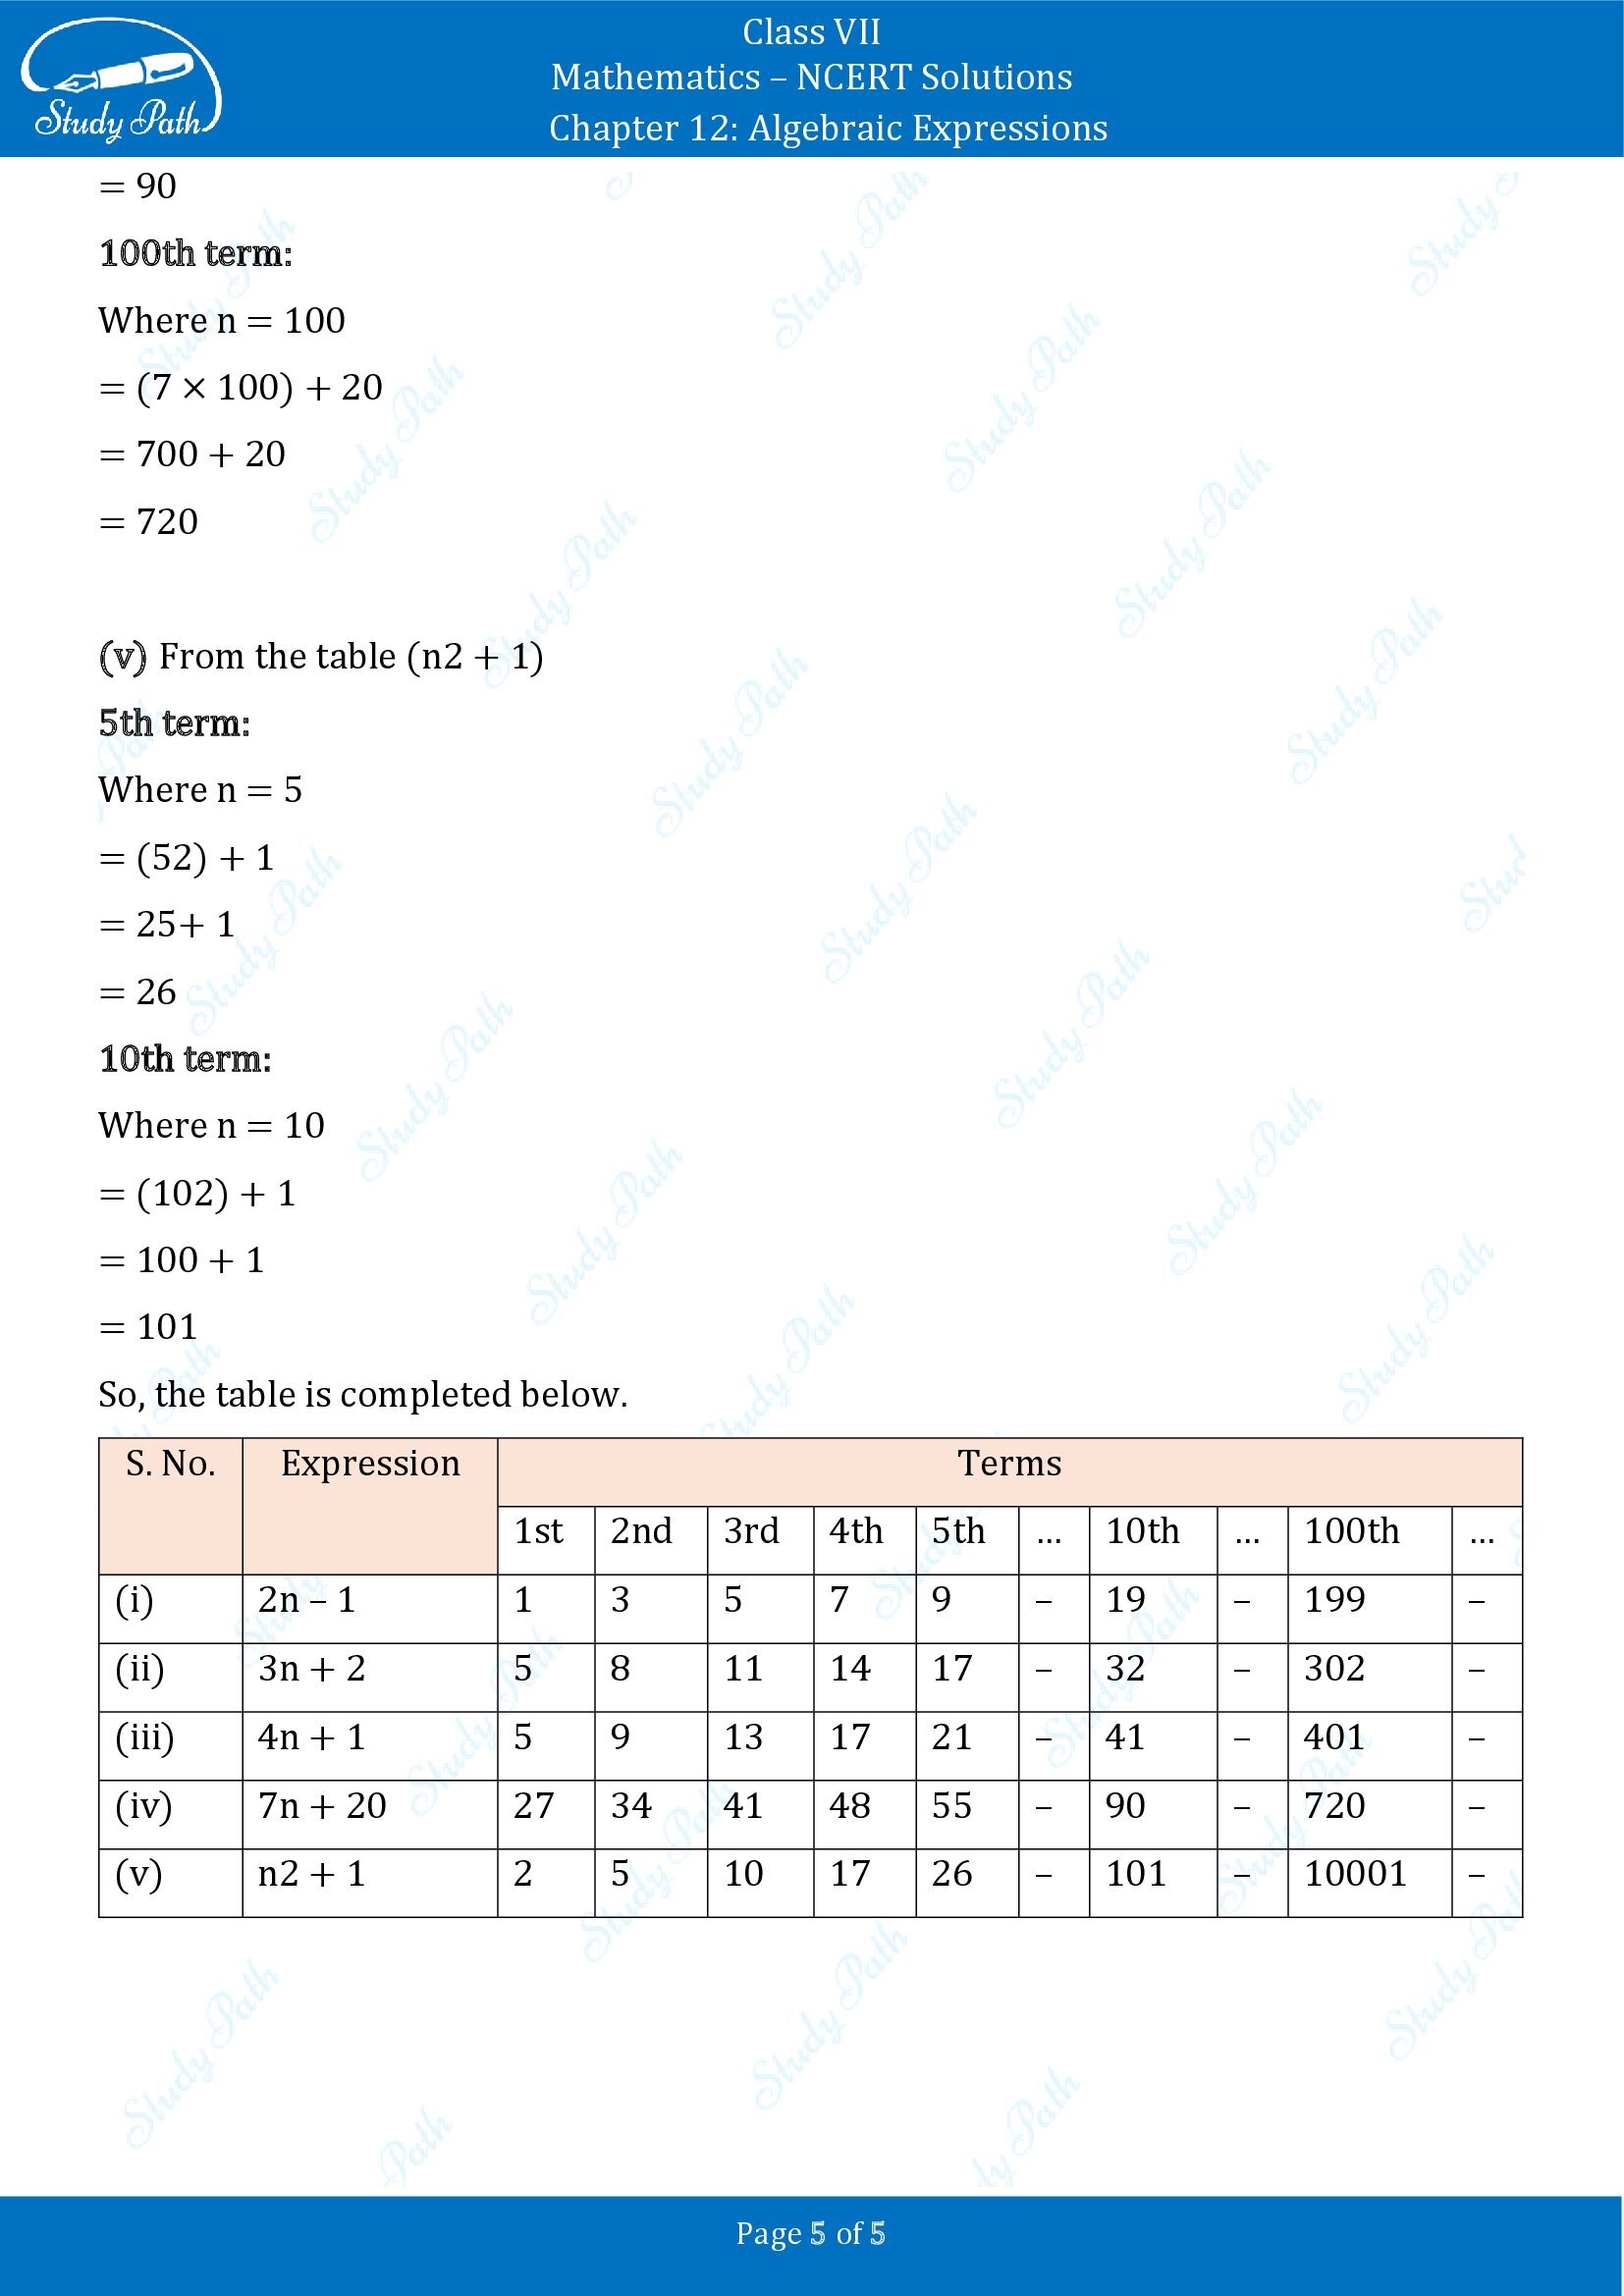 NCERT Solutions for Class 7 Maths Chapter 12 Algebraic Expressions Exercise 12.4 00005